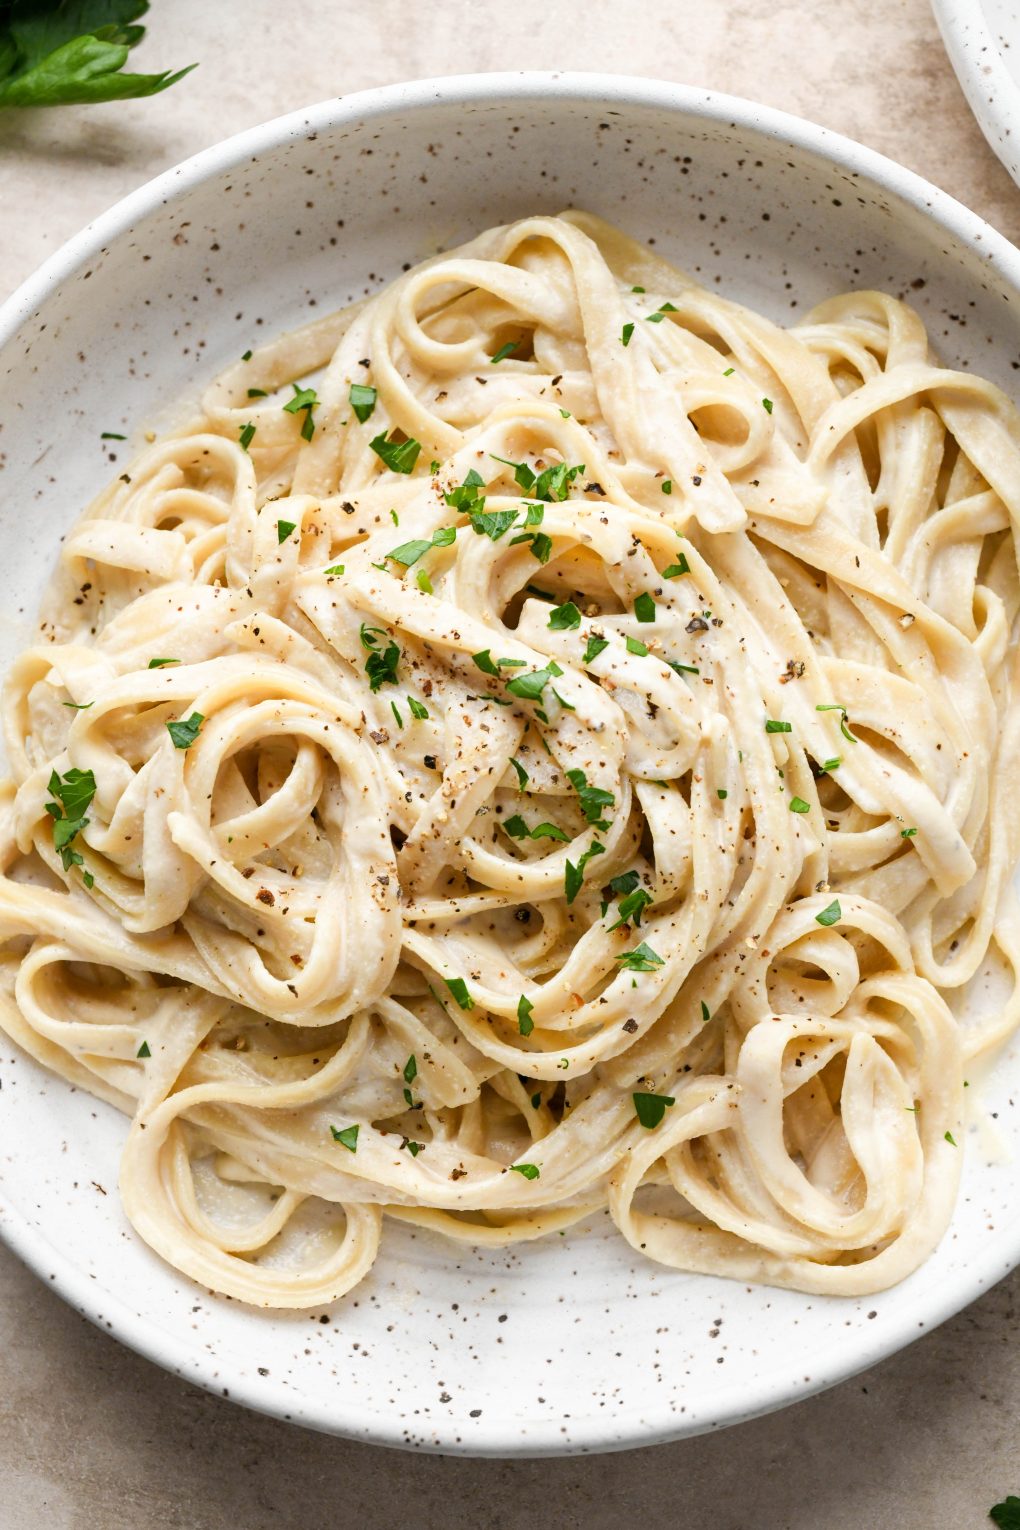 A bowl of dairy free fettuccine alfredo on a light brown colored background. Topped with black pepper and fresh herbs.